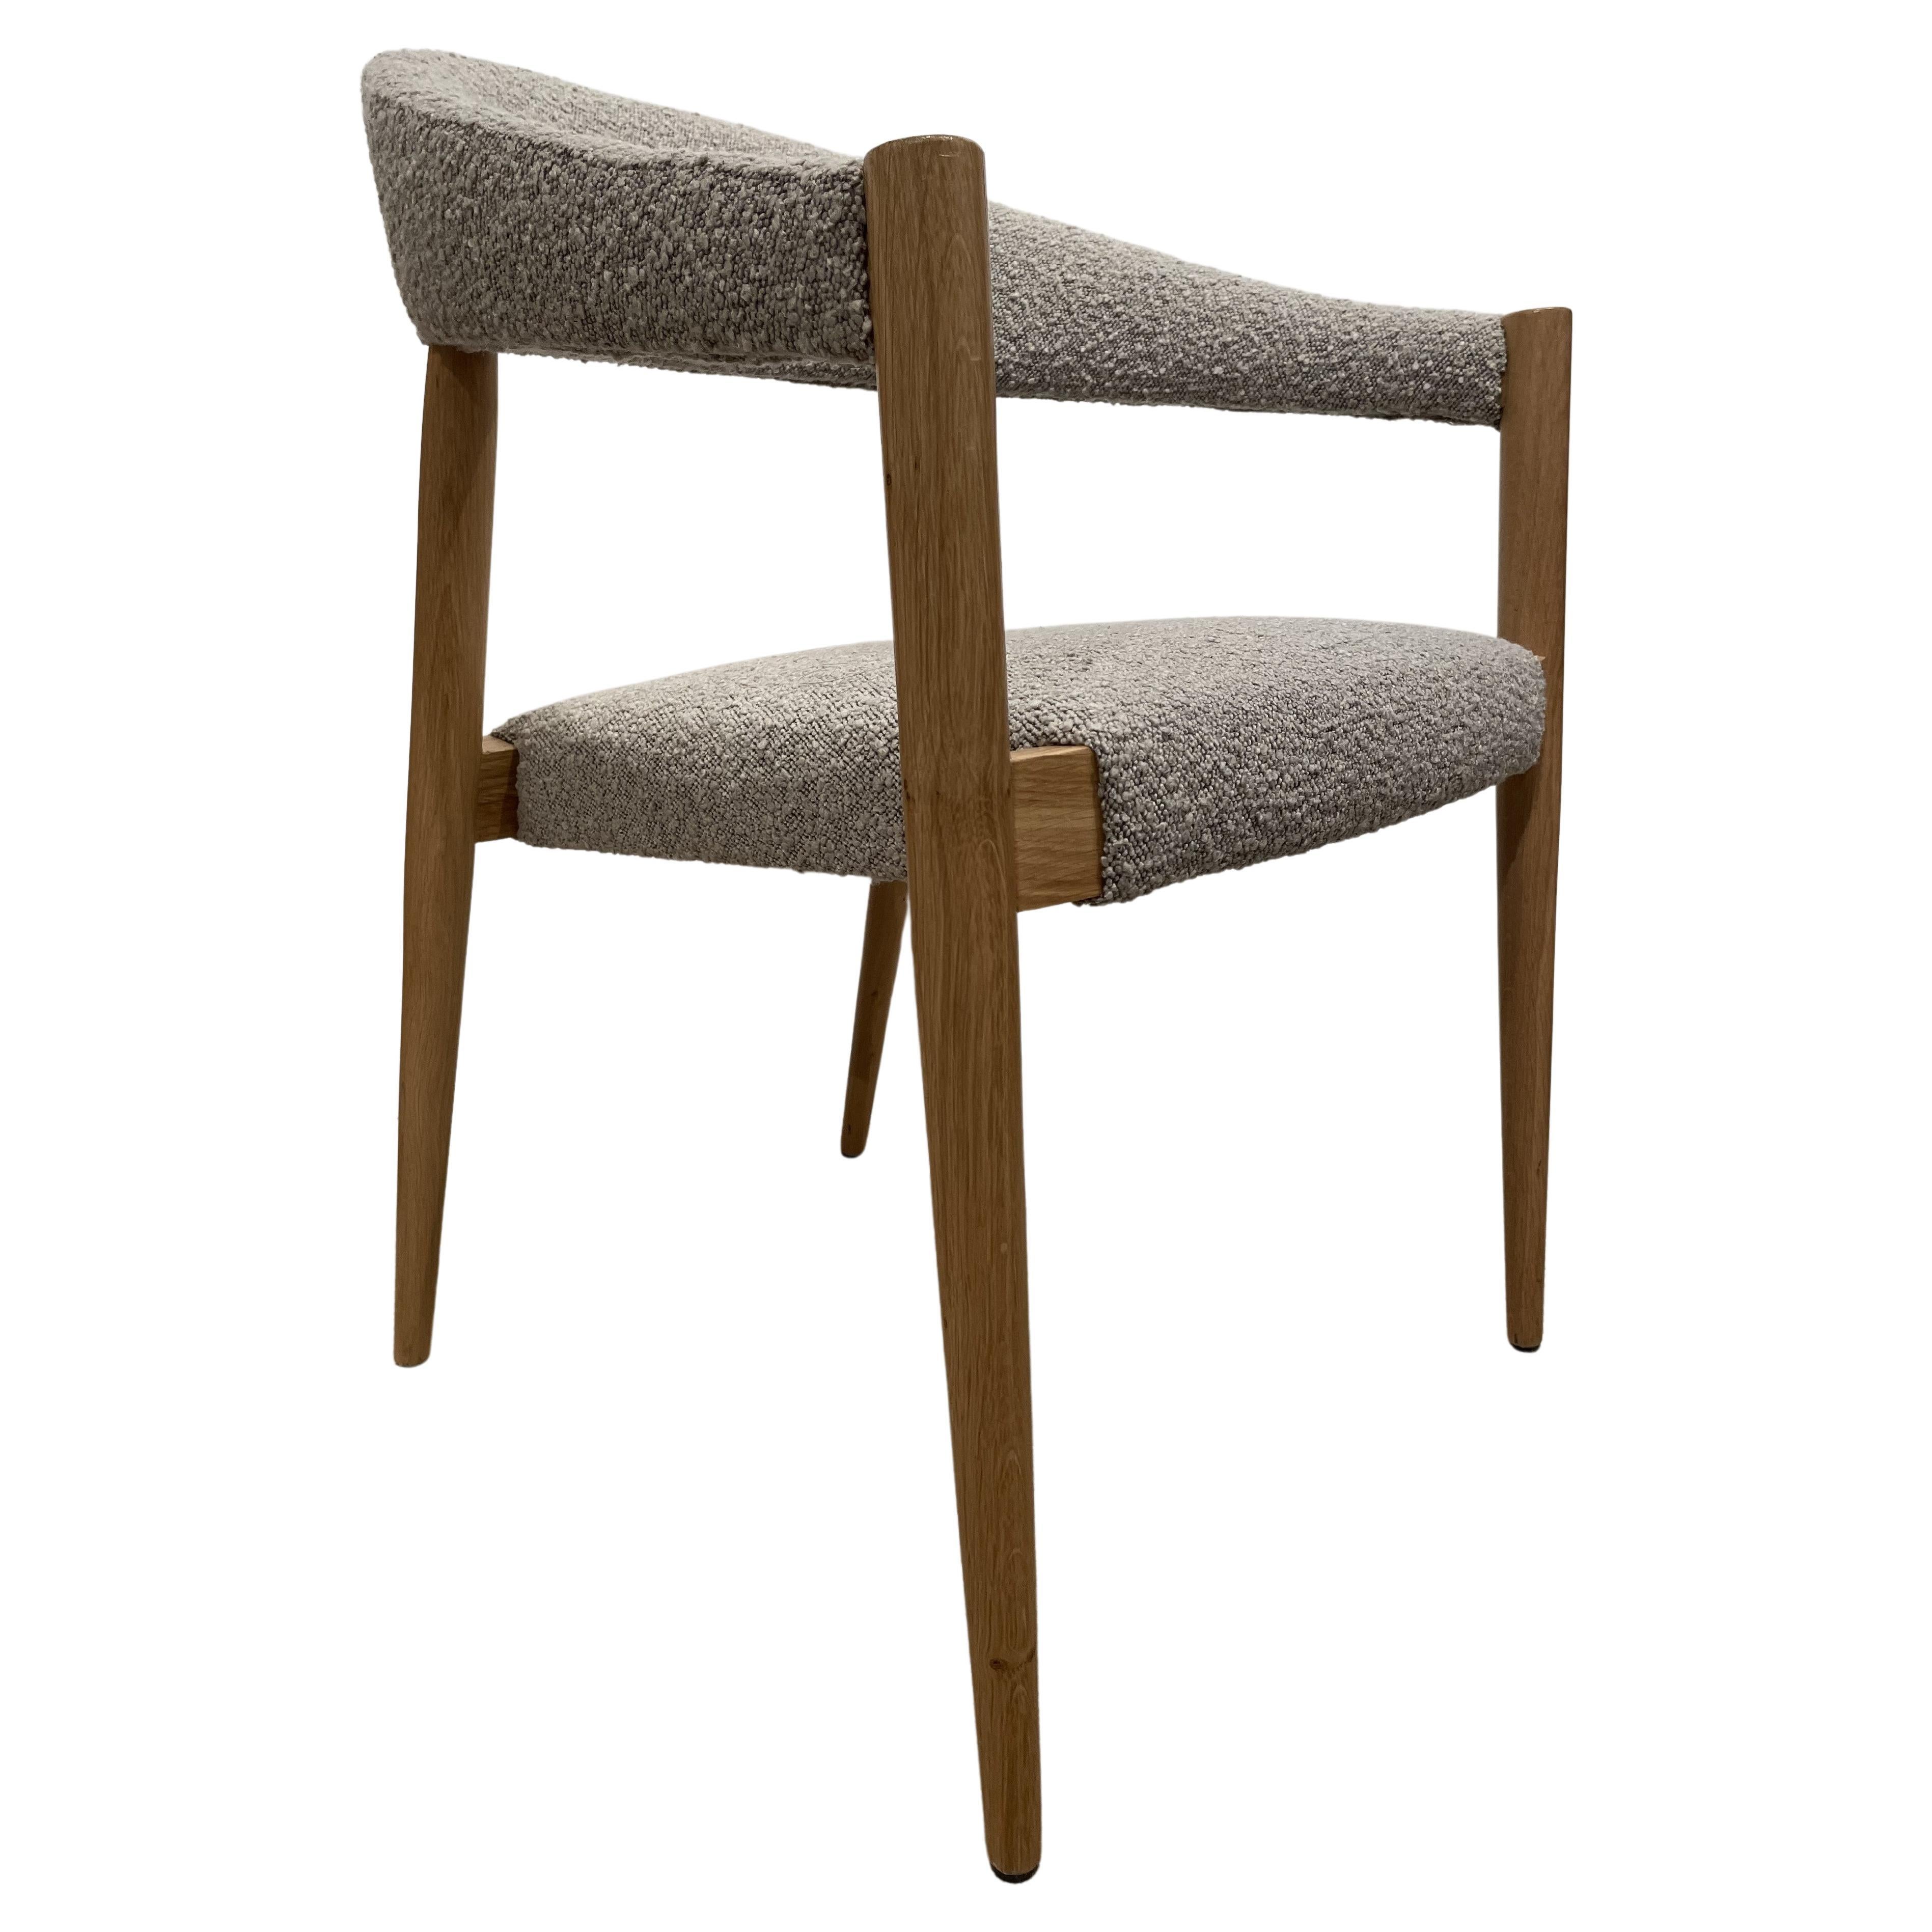 1960s Danish Design and Scandinavian Style Wooden and Bouclé Fabric Chair For Sale